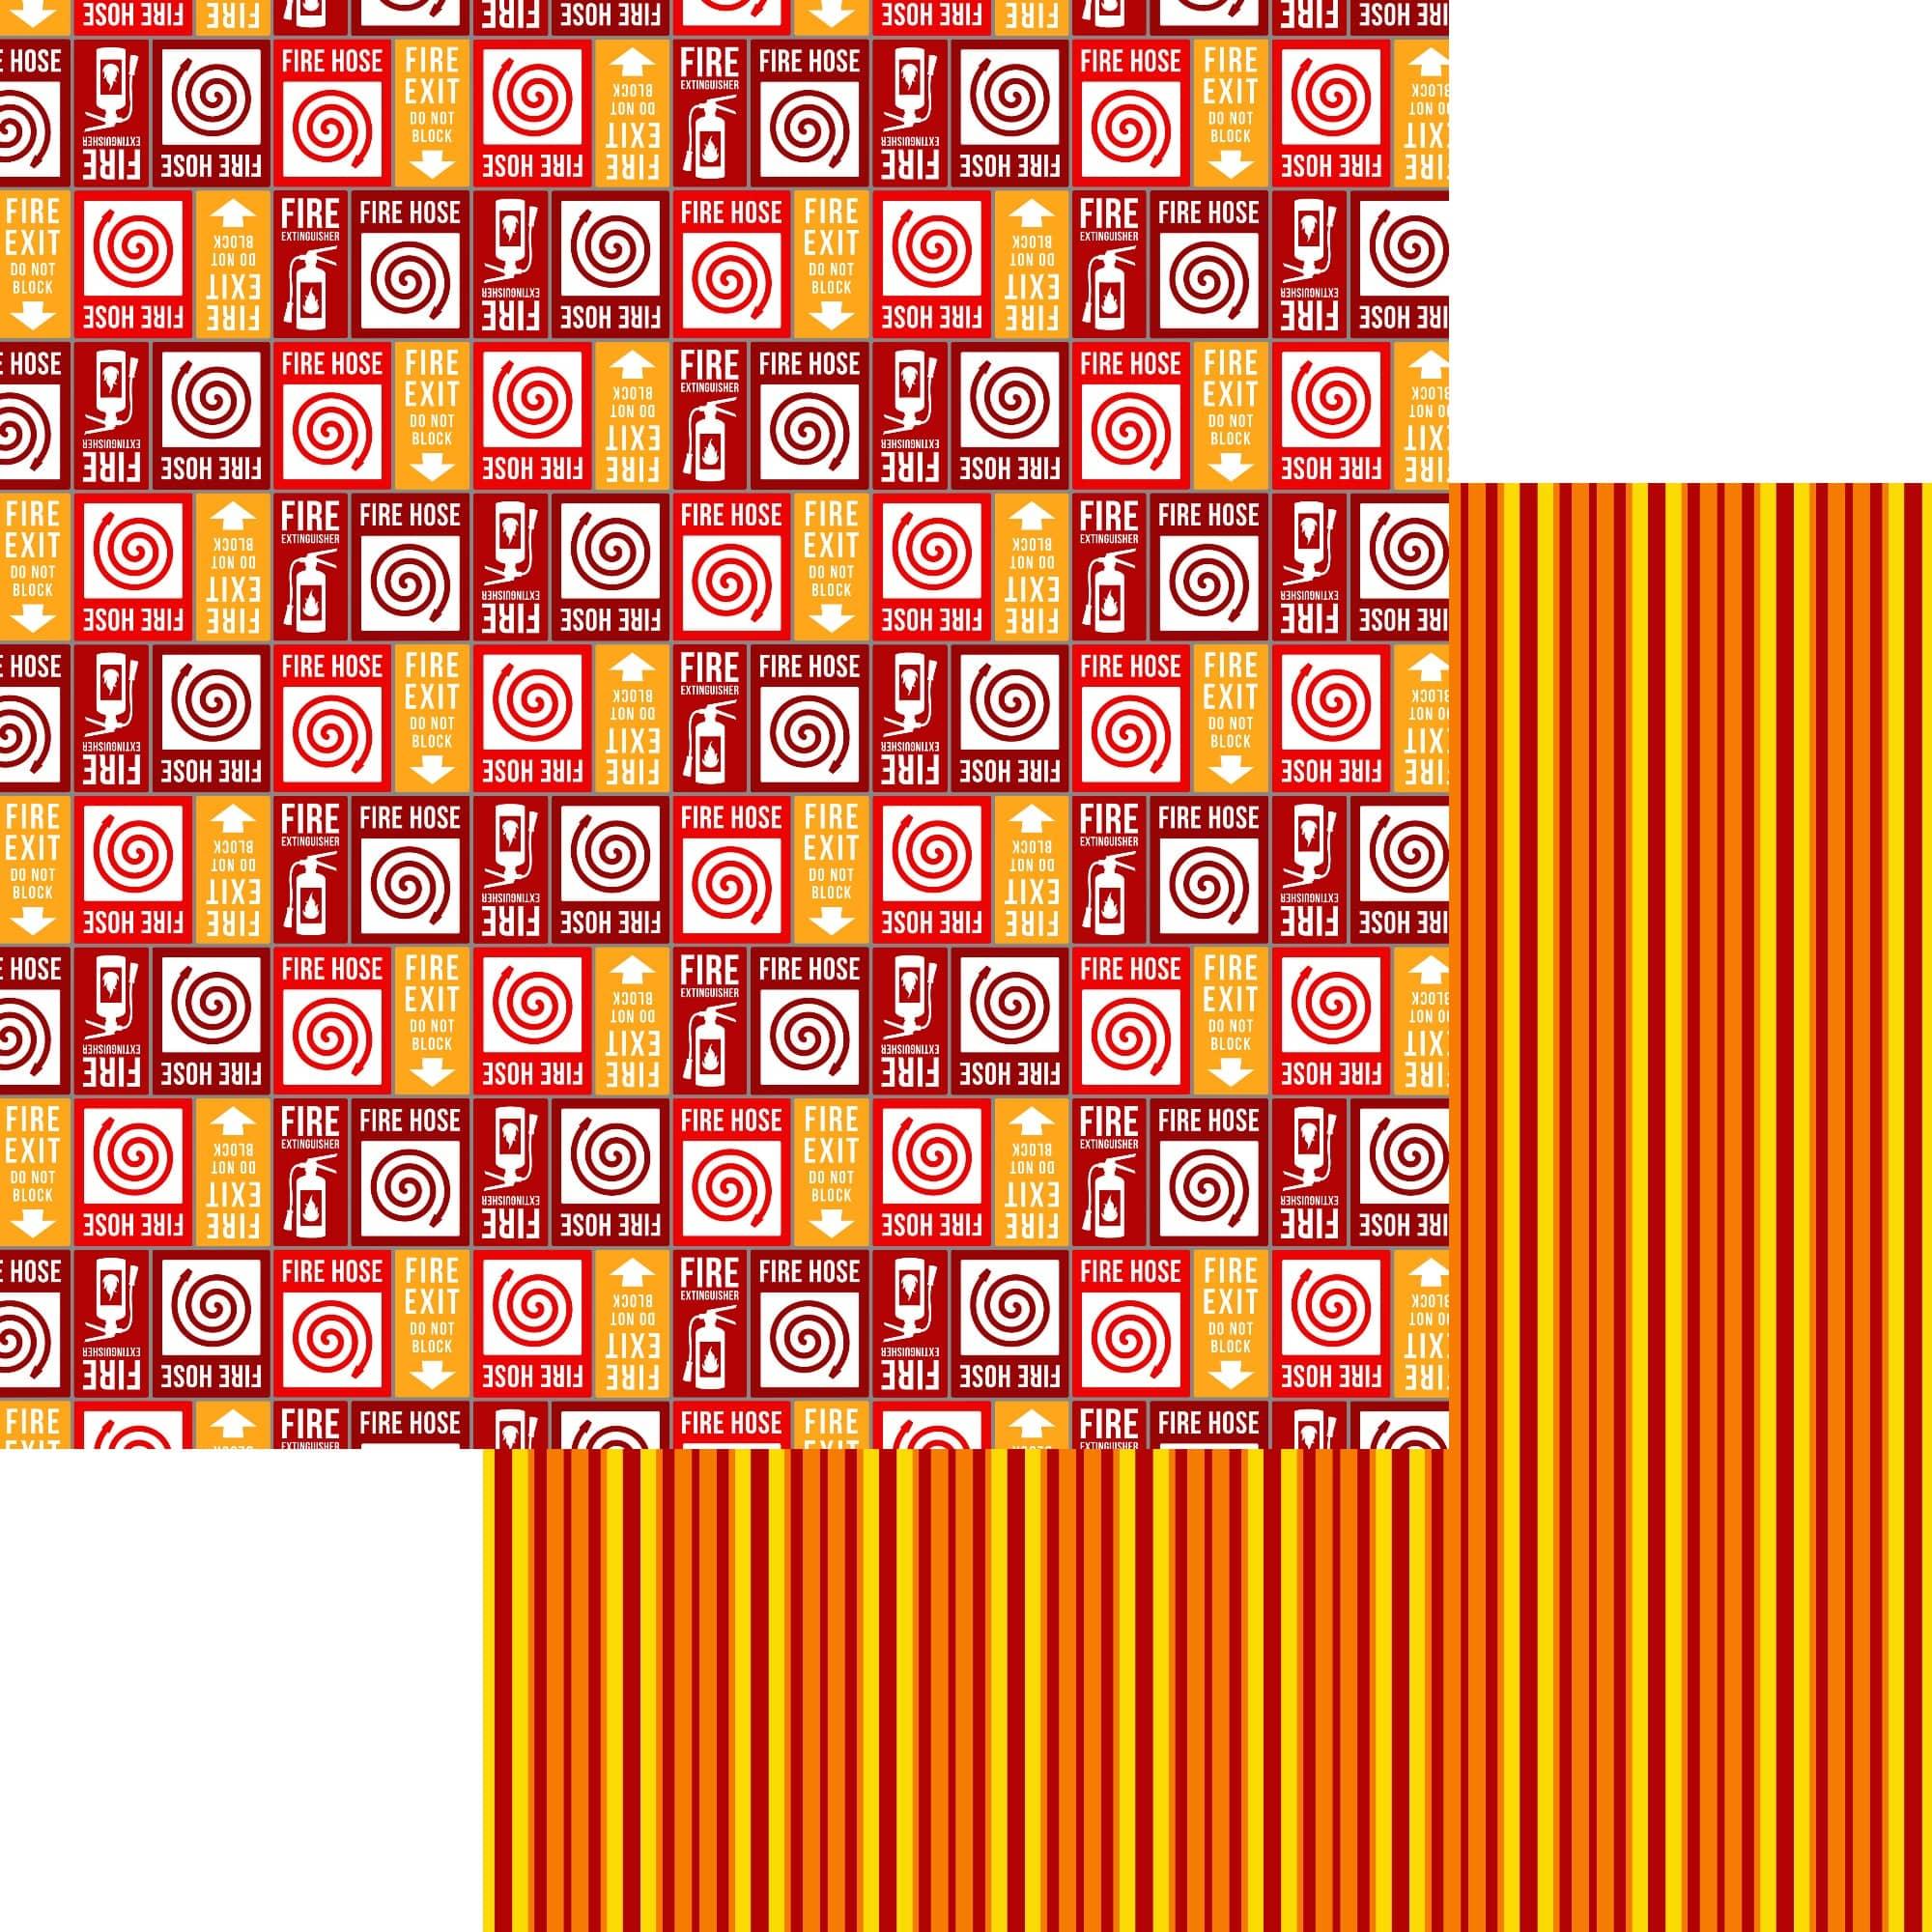 Occupation Collection Firefighter Stripes 12 x 12 Double-Sided Scrapbook Paper by SSC Designs - Scrapbook Supply Companies